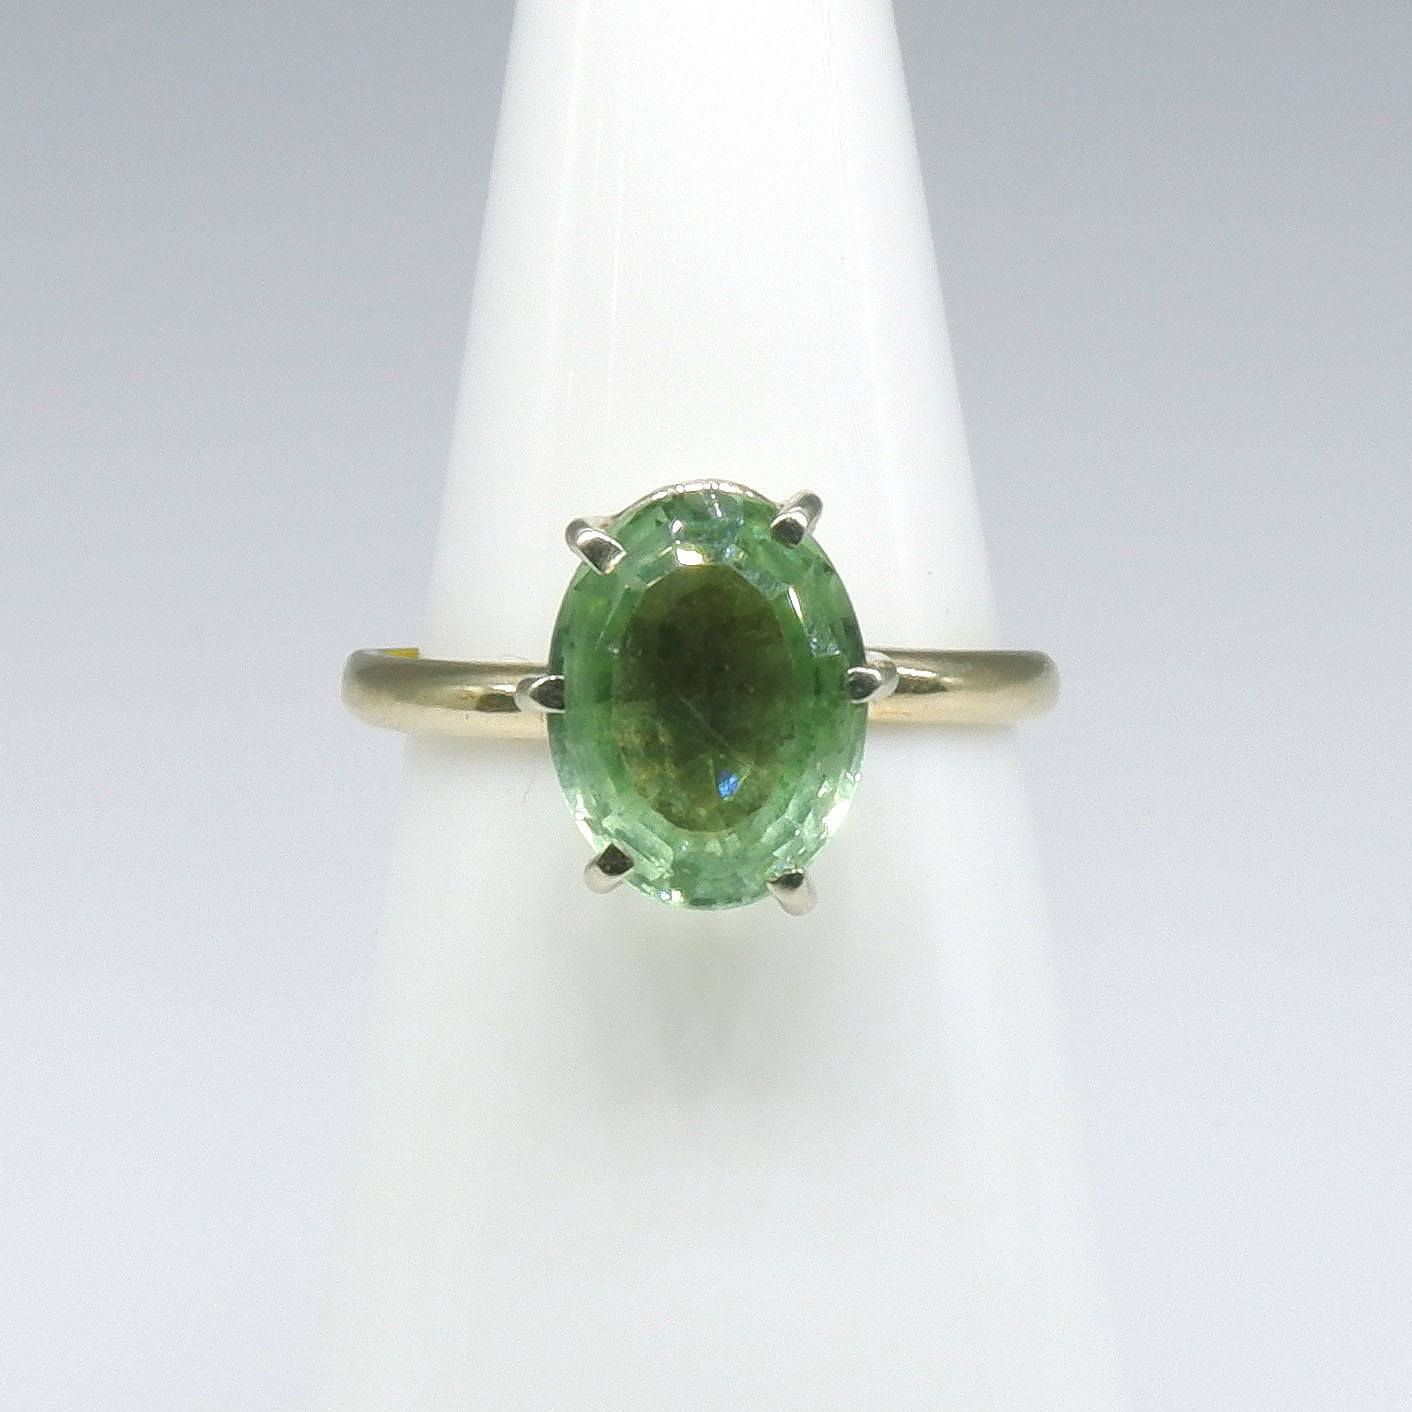 '18ct White Gold with Oval Facetted Green Quartz Ring'